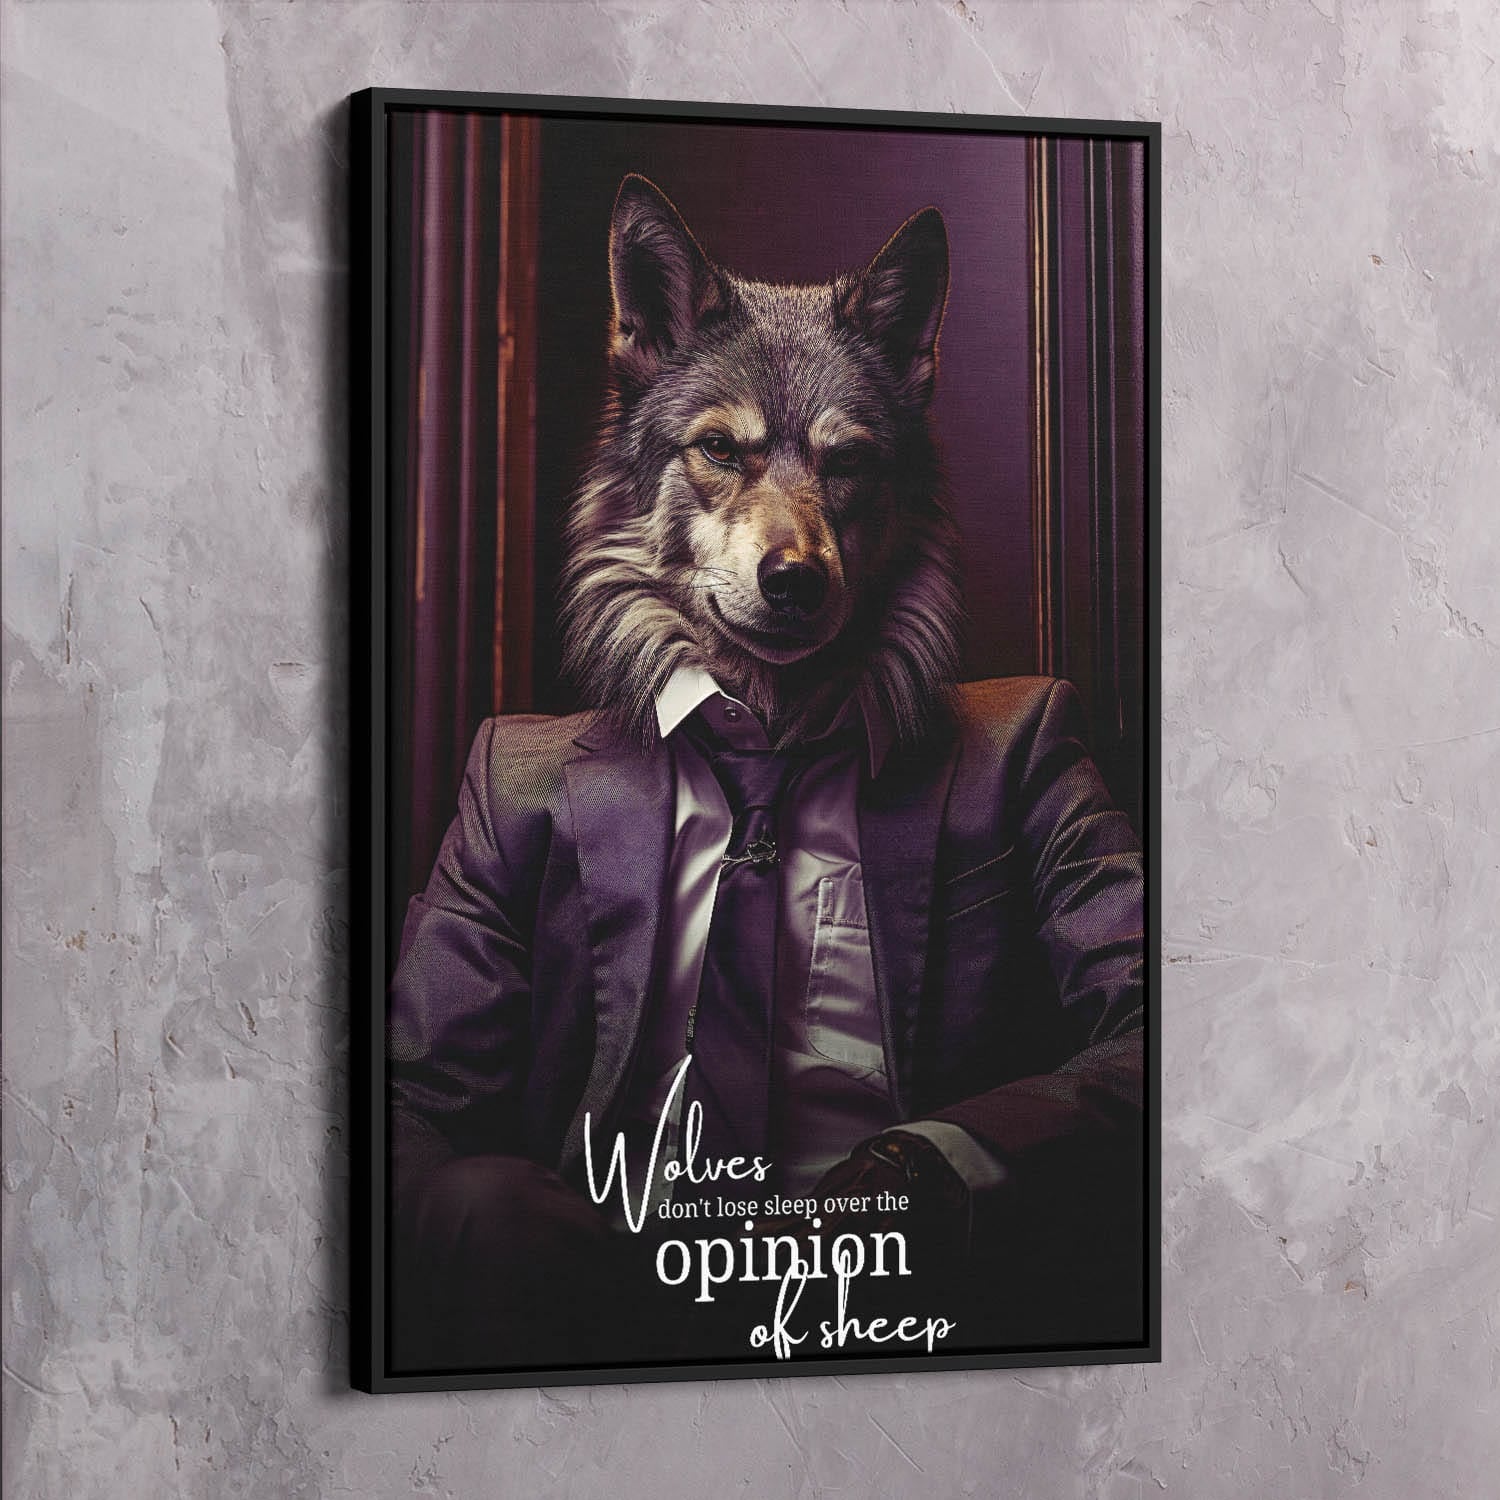 Wolves don't lose sleep over the opinion of sheep Wall Art | Inspirational Wall Art Motivational Wall Art Quotes Office Art | ImpaktMaker Exclusive Canvas Art Portrait